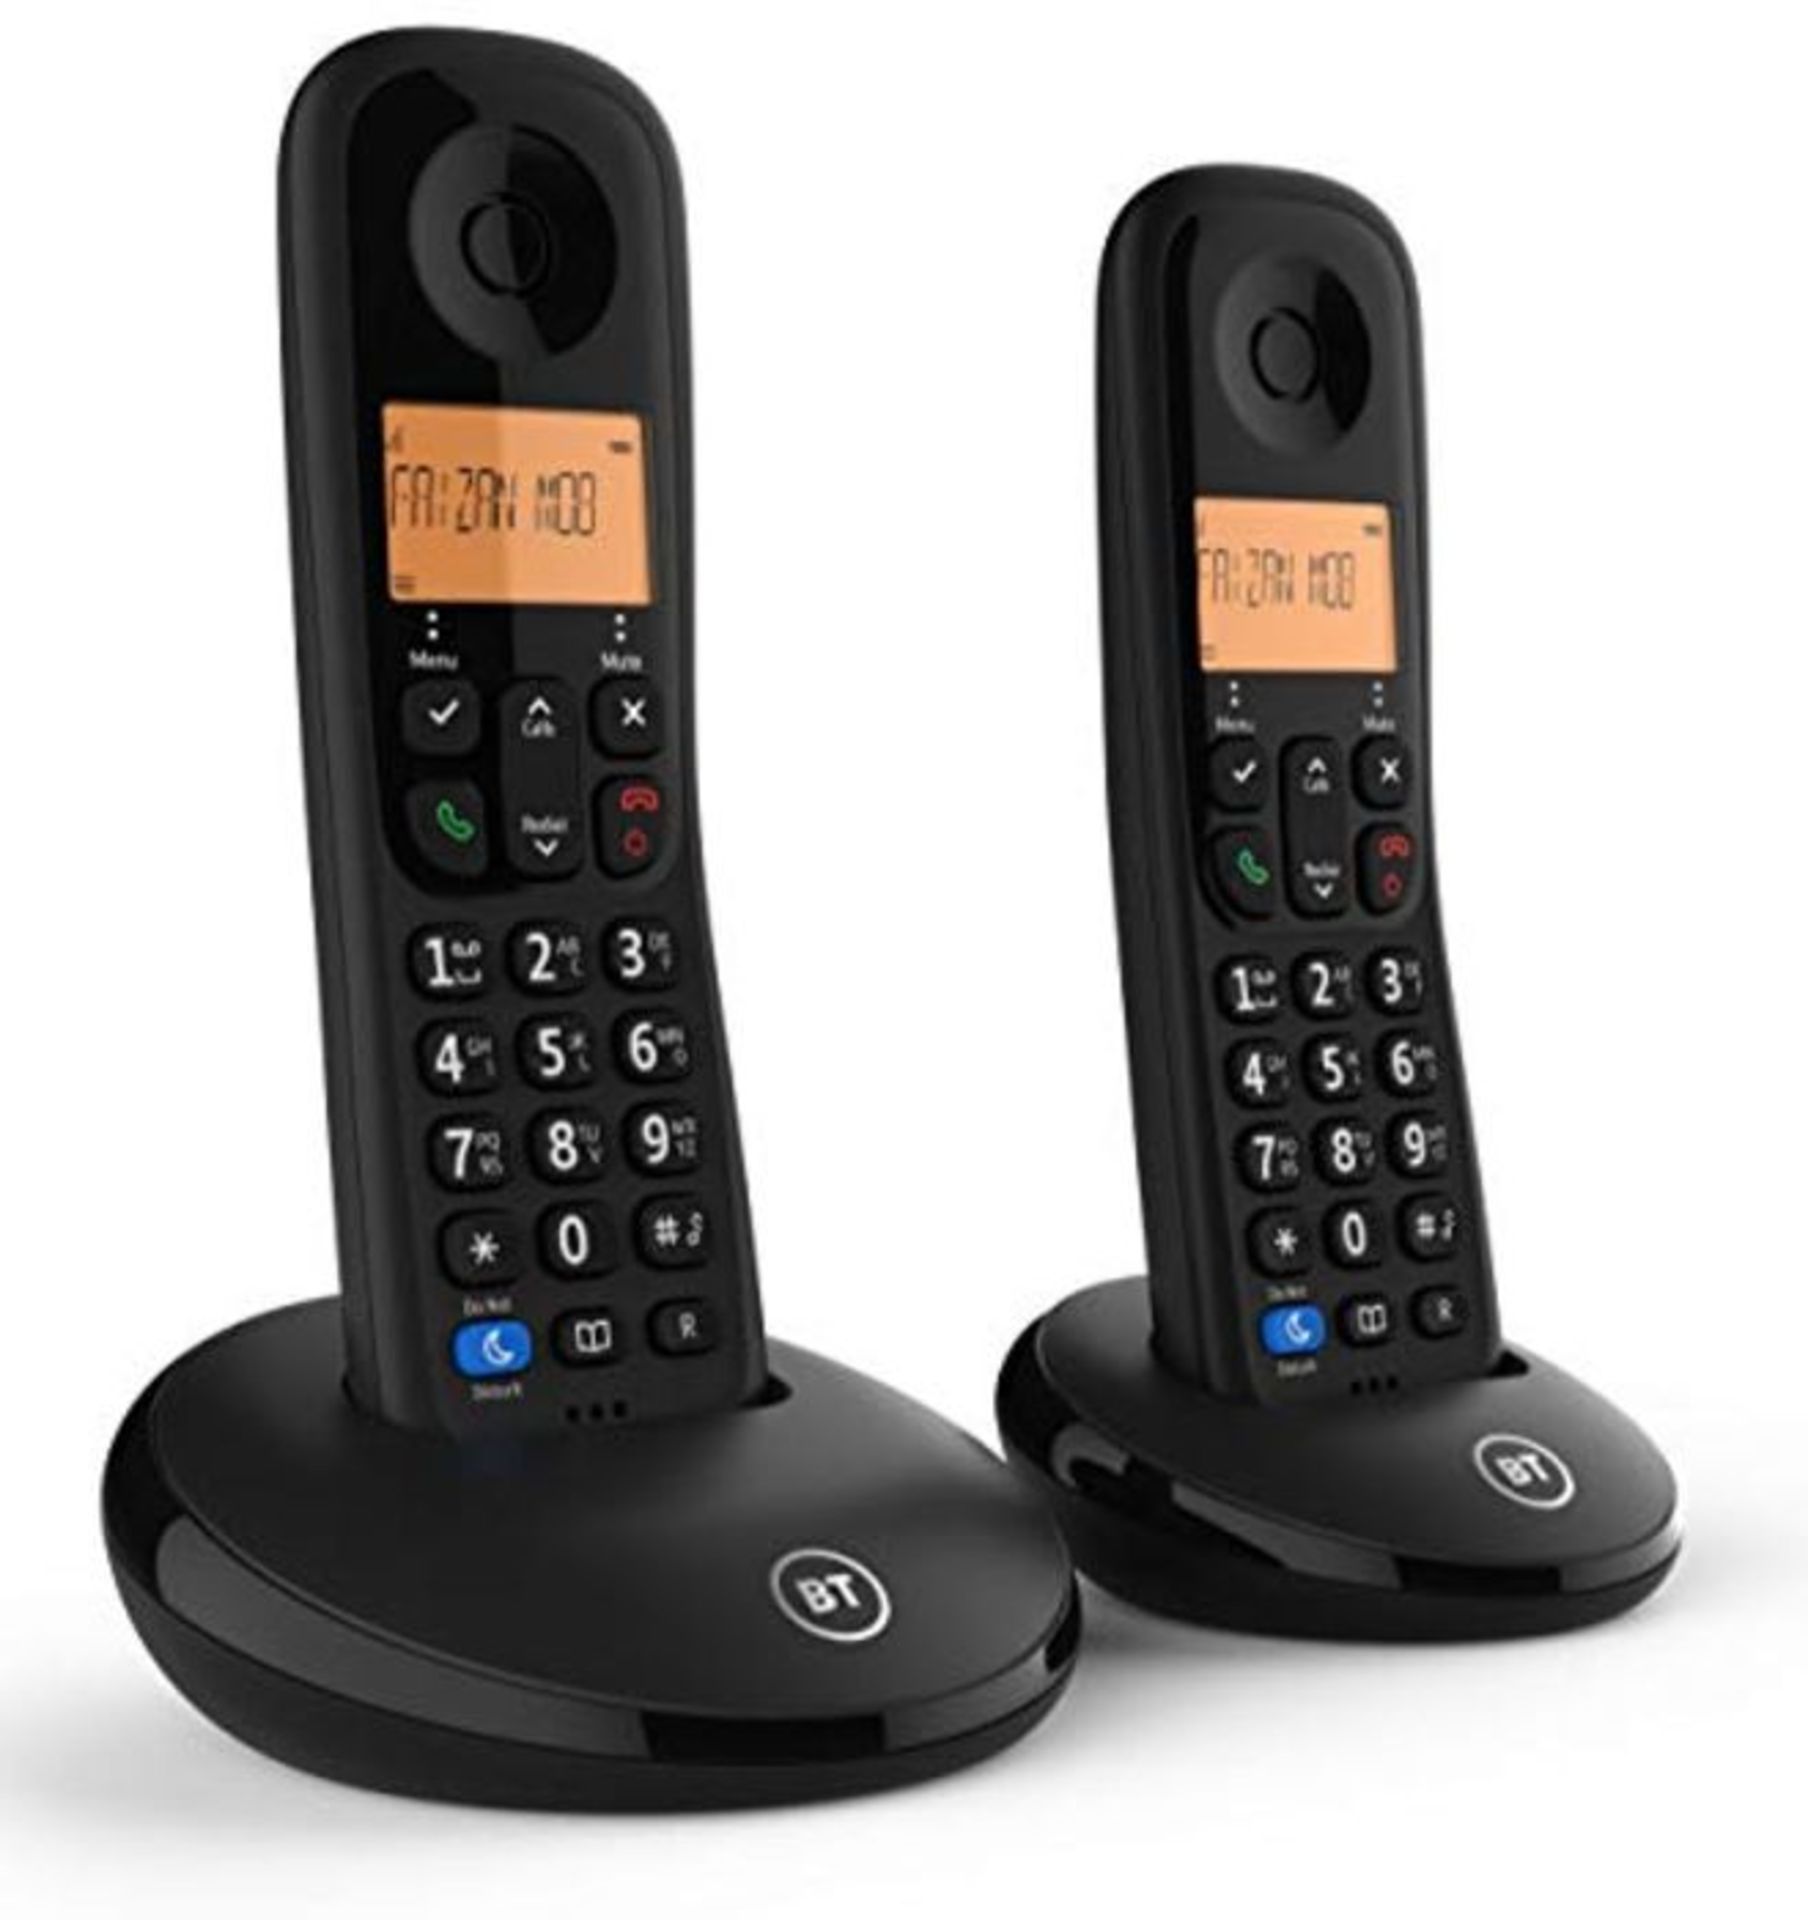 BT Everyday Cordless Home Phone with Basic Call Blocking, Twin Handset Pack